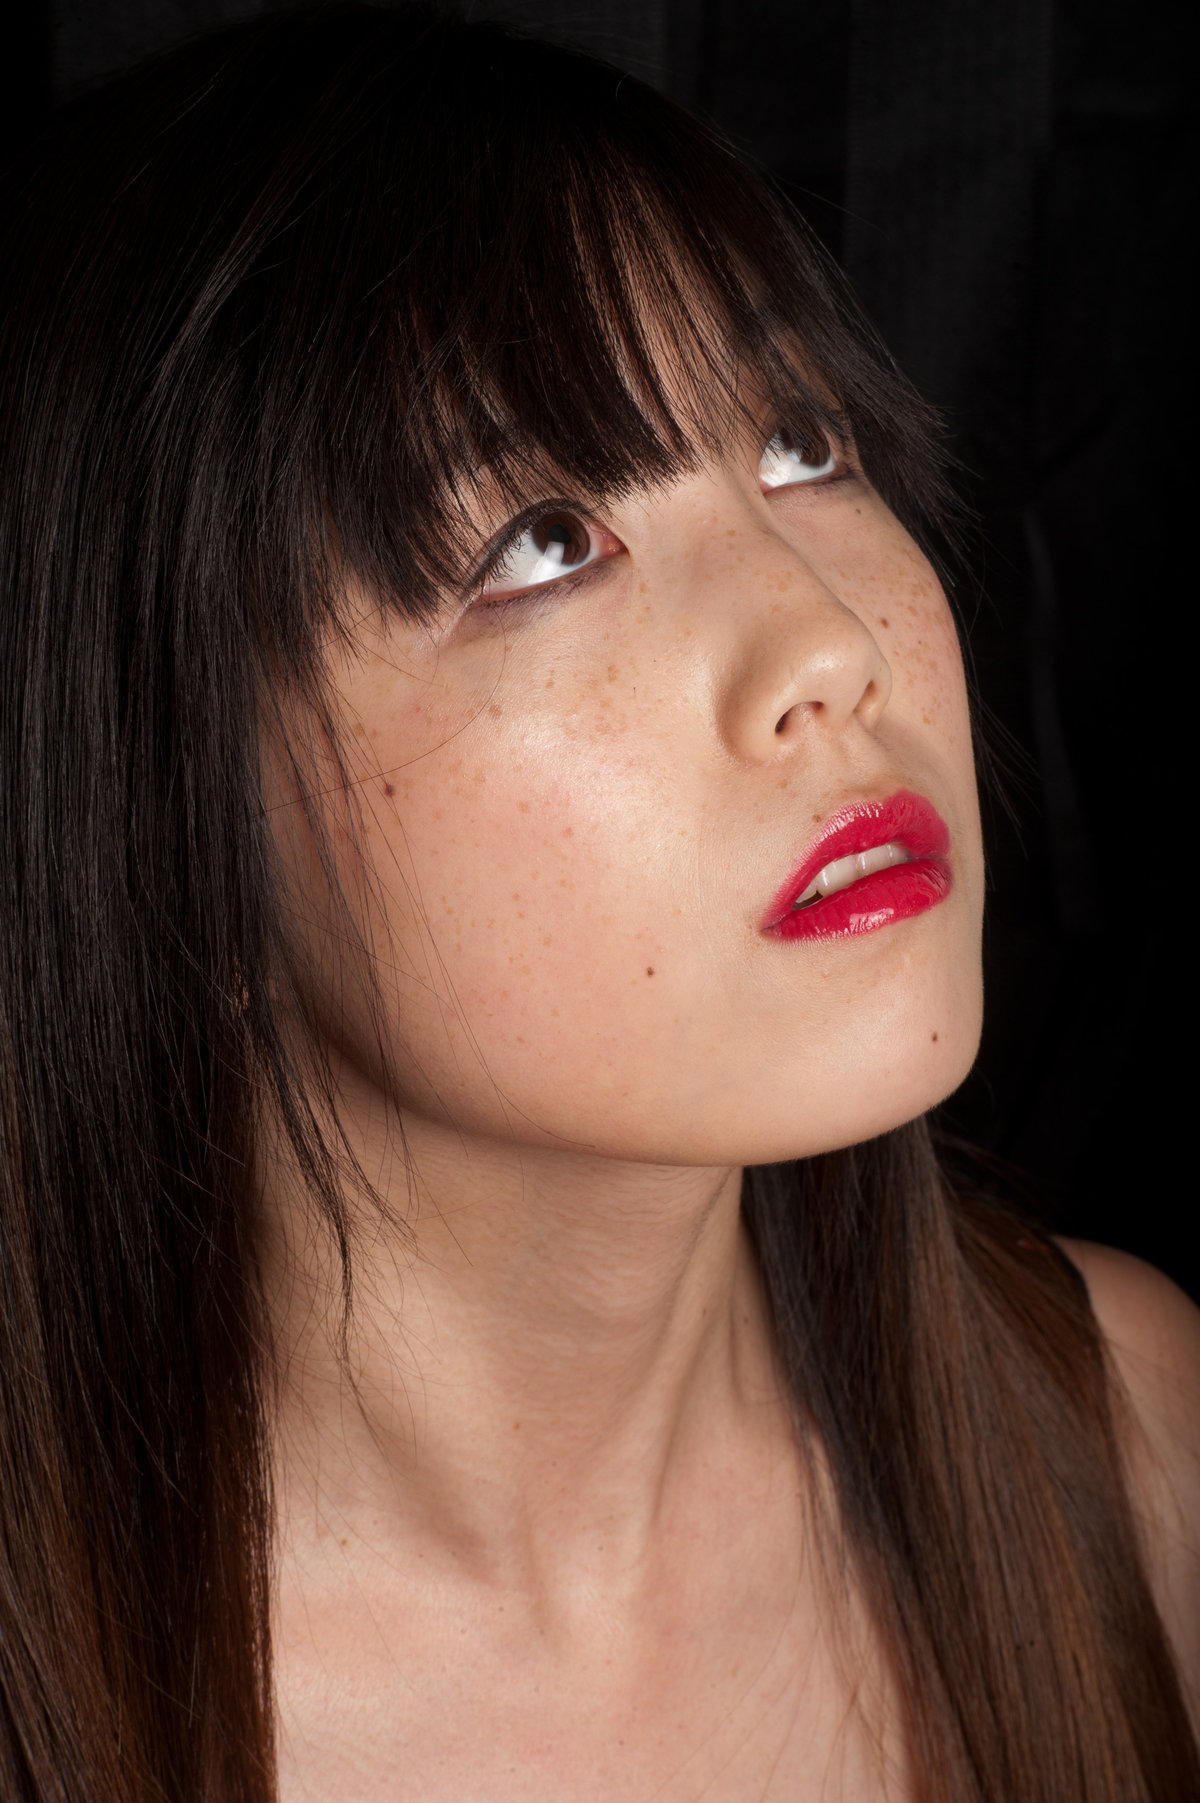 Asian young woman with a bright red lip and fresh looking skin